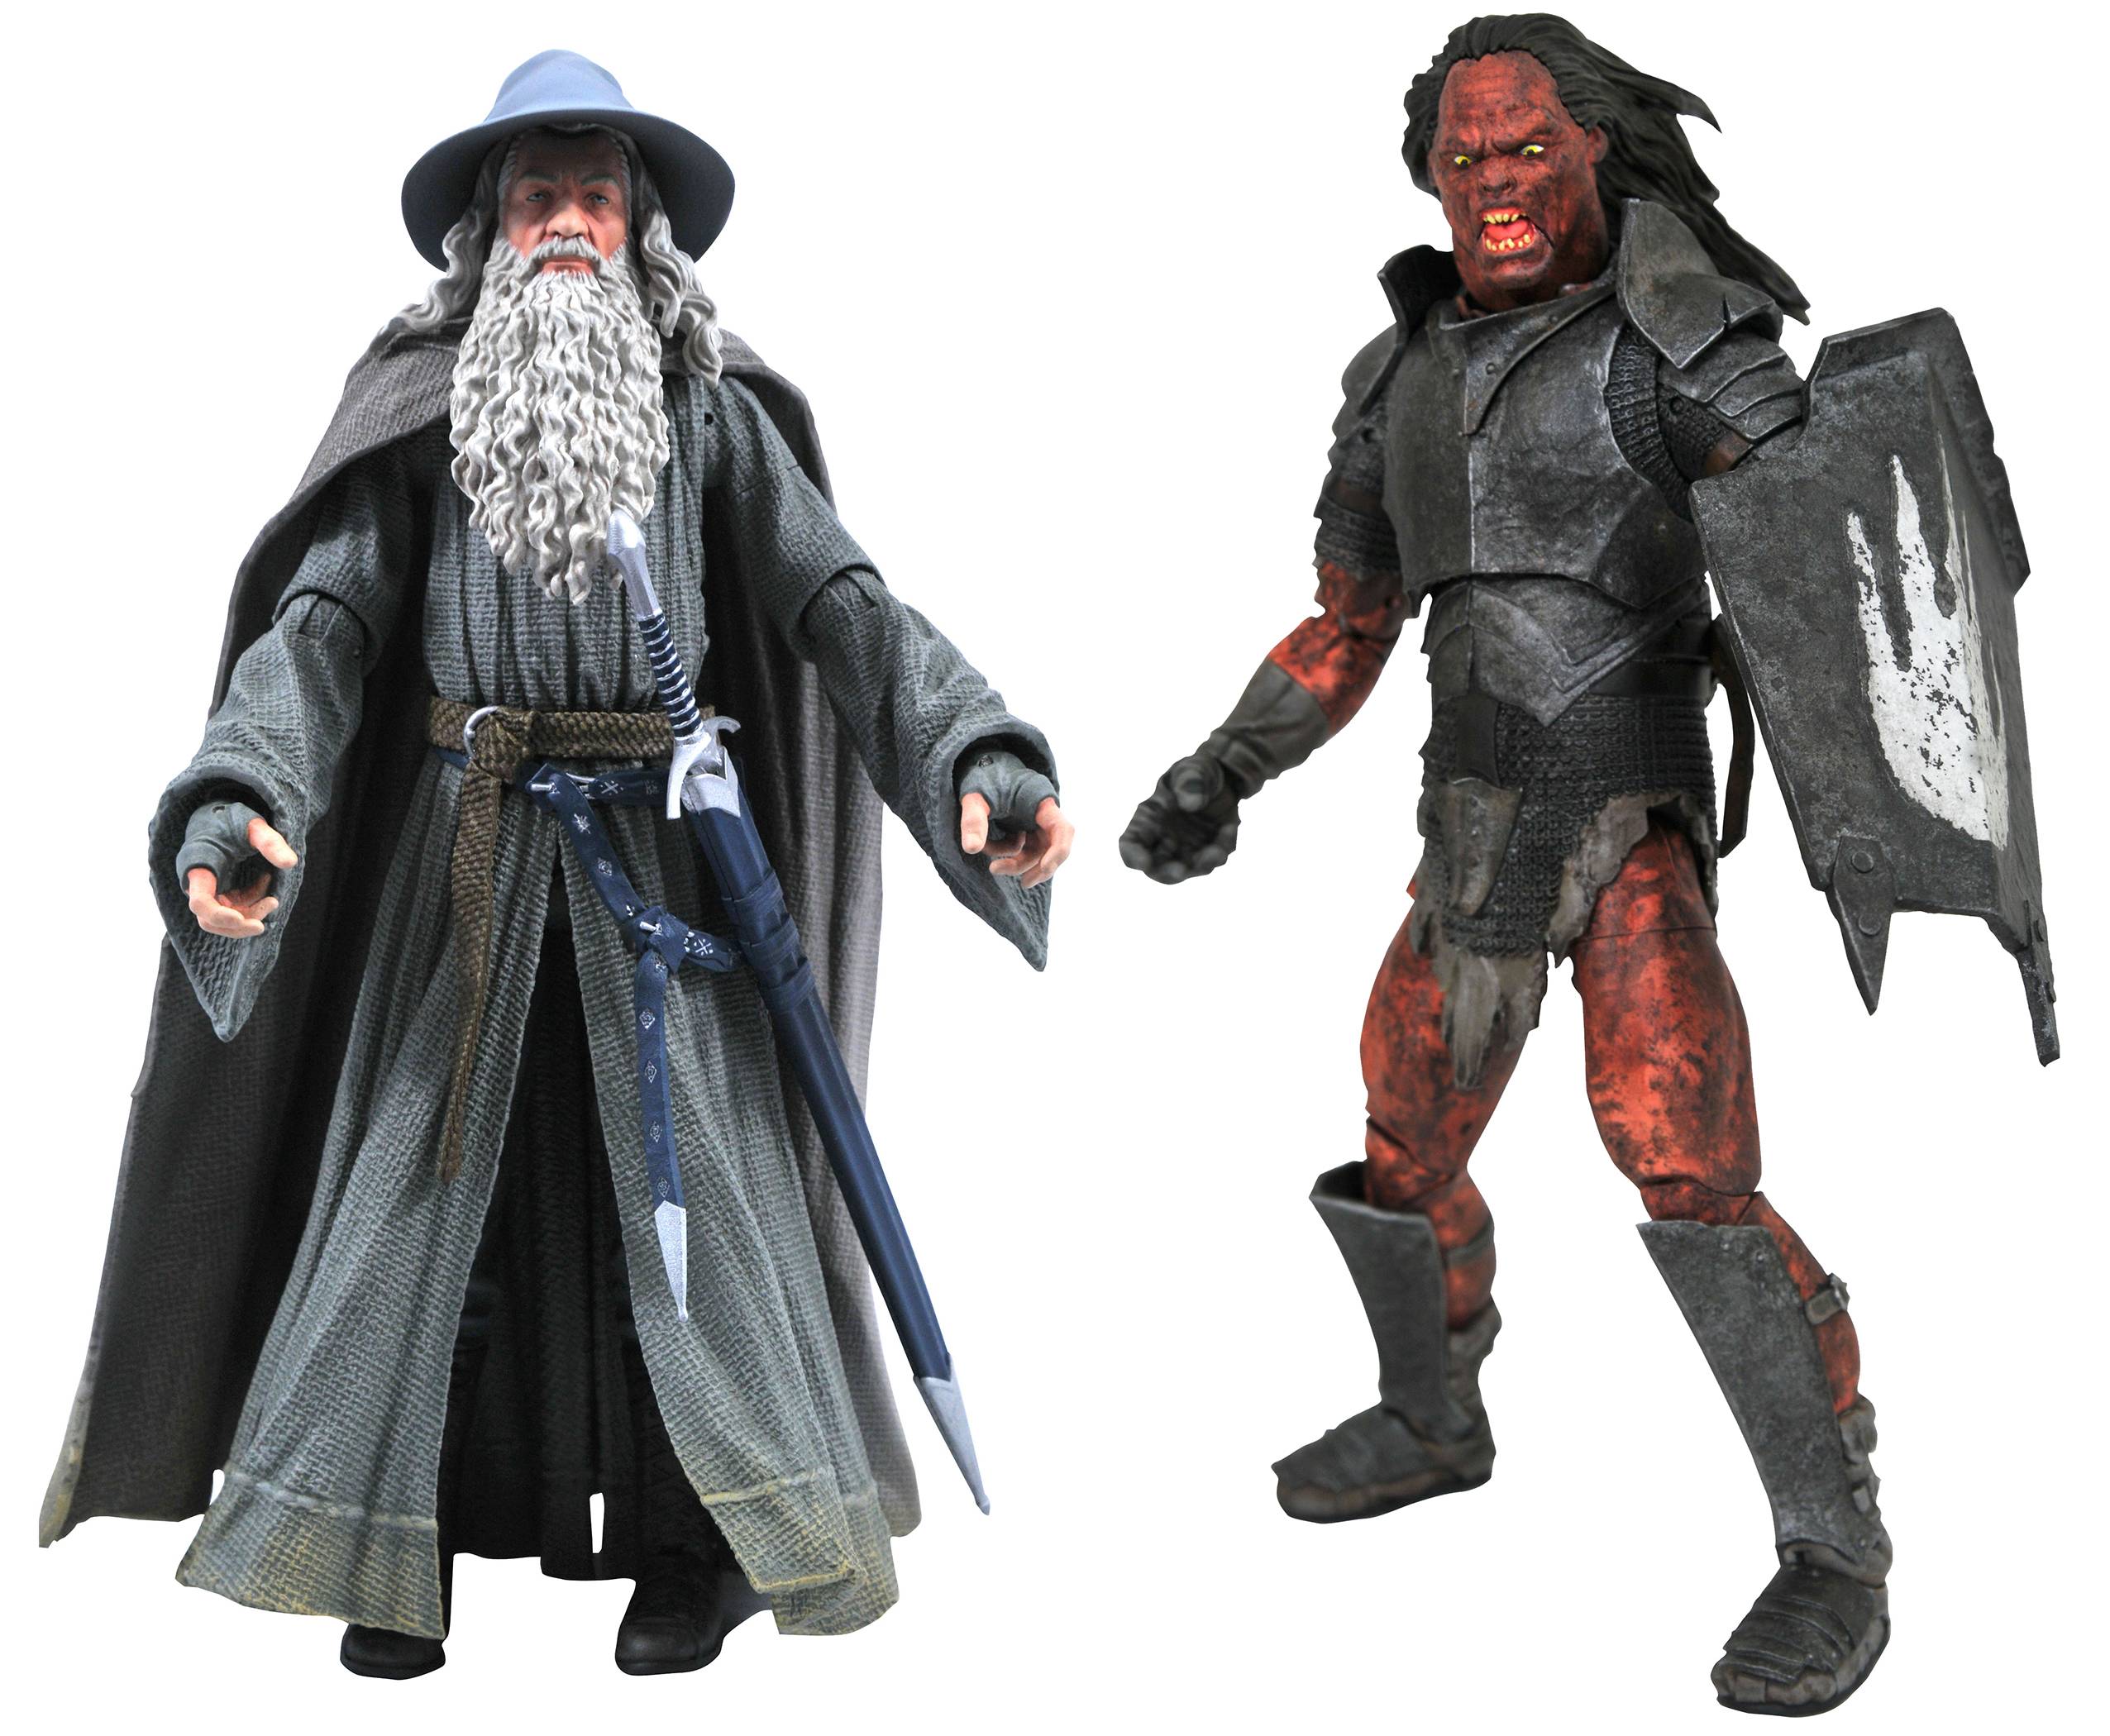 LORD OF THE RINGS DLX AF ASST SERIES 4 (O/A)